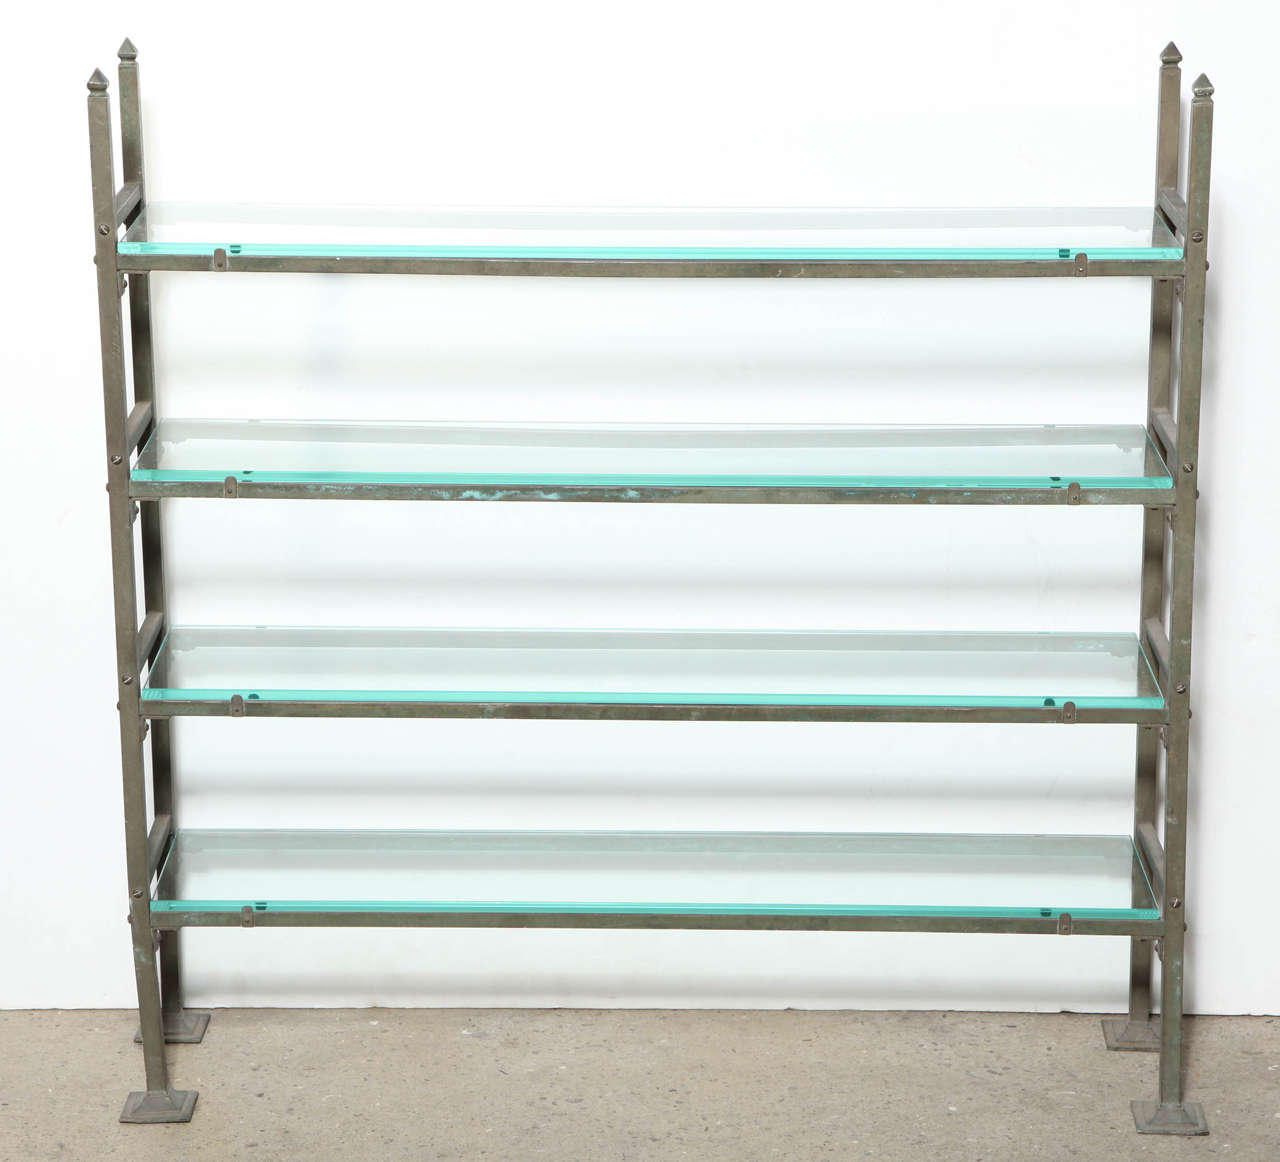 Late 19th Century Brass Edwardian Bread Rack repurposed with four new Beveled Glass Shelves. Featuring a nicely weighted rectangular ladder form in patinated Brass, pyramid top corner details and sturdy square feet.  Beveled glass shelves measure: 7